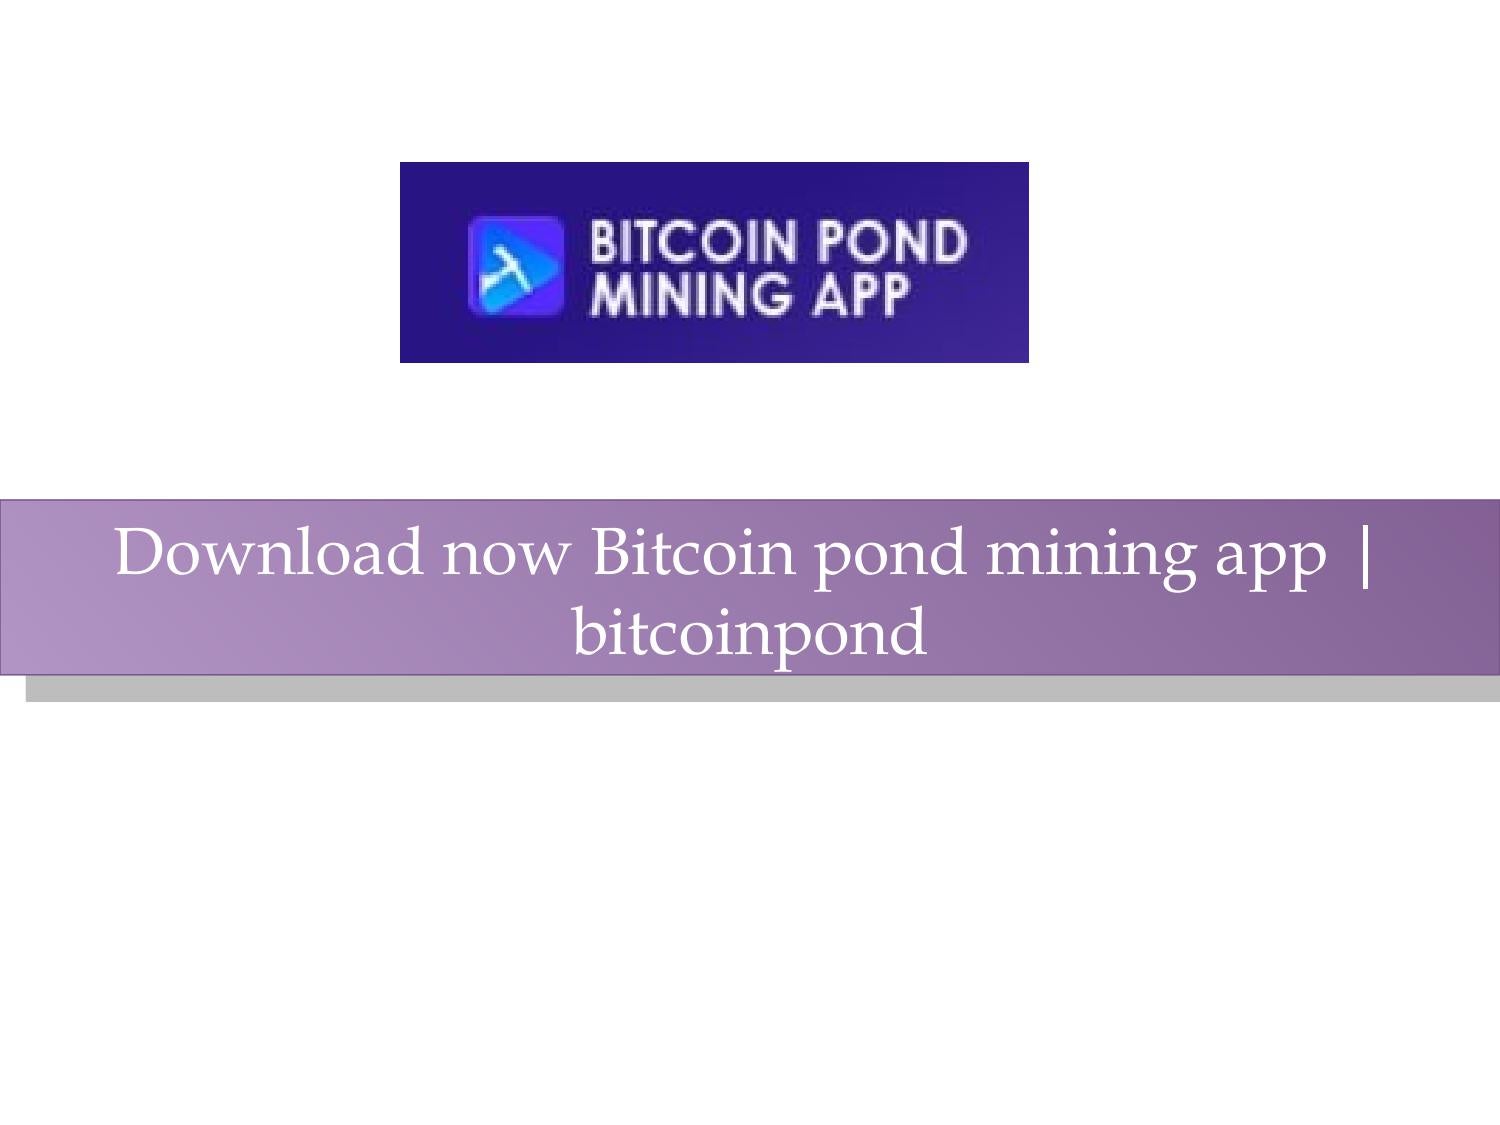 Bitcoin pond mining app - Site Pictures